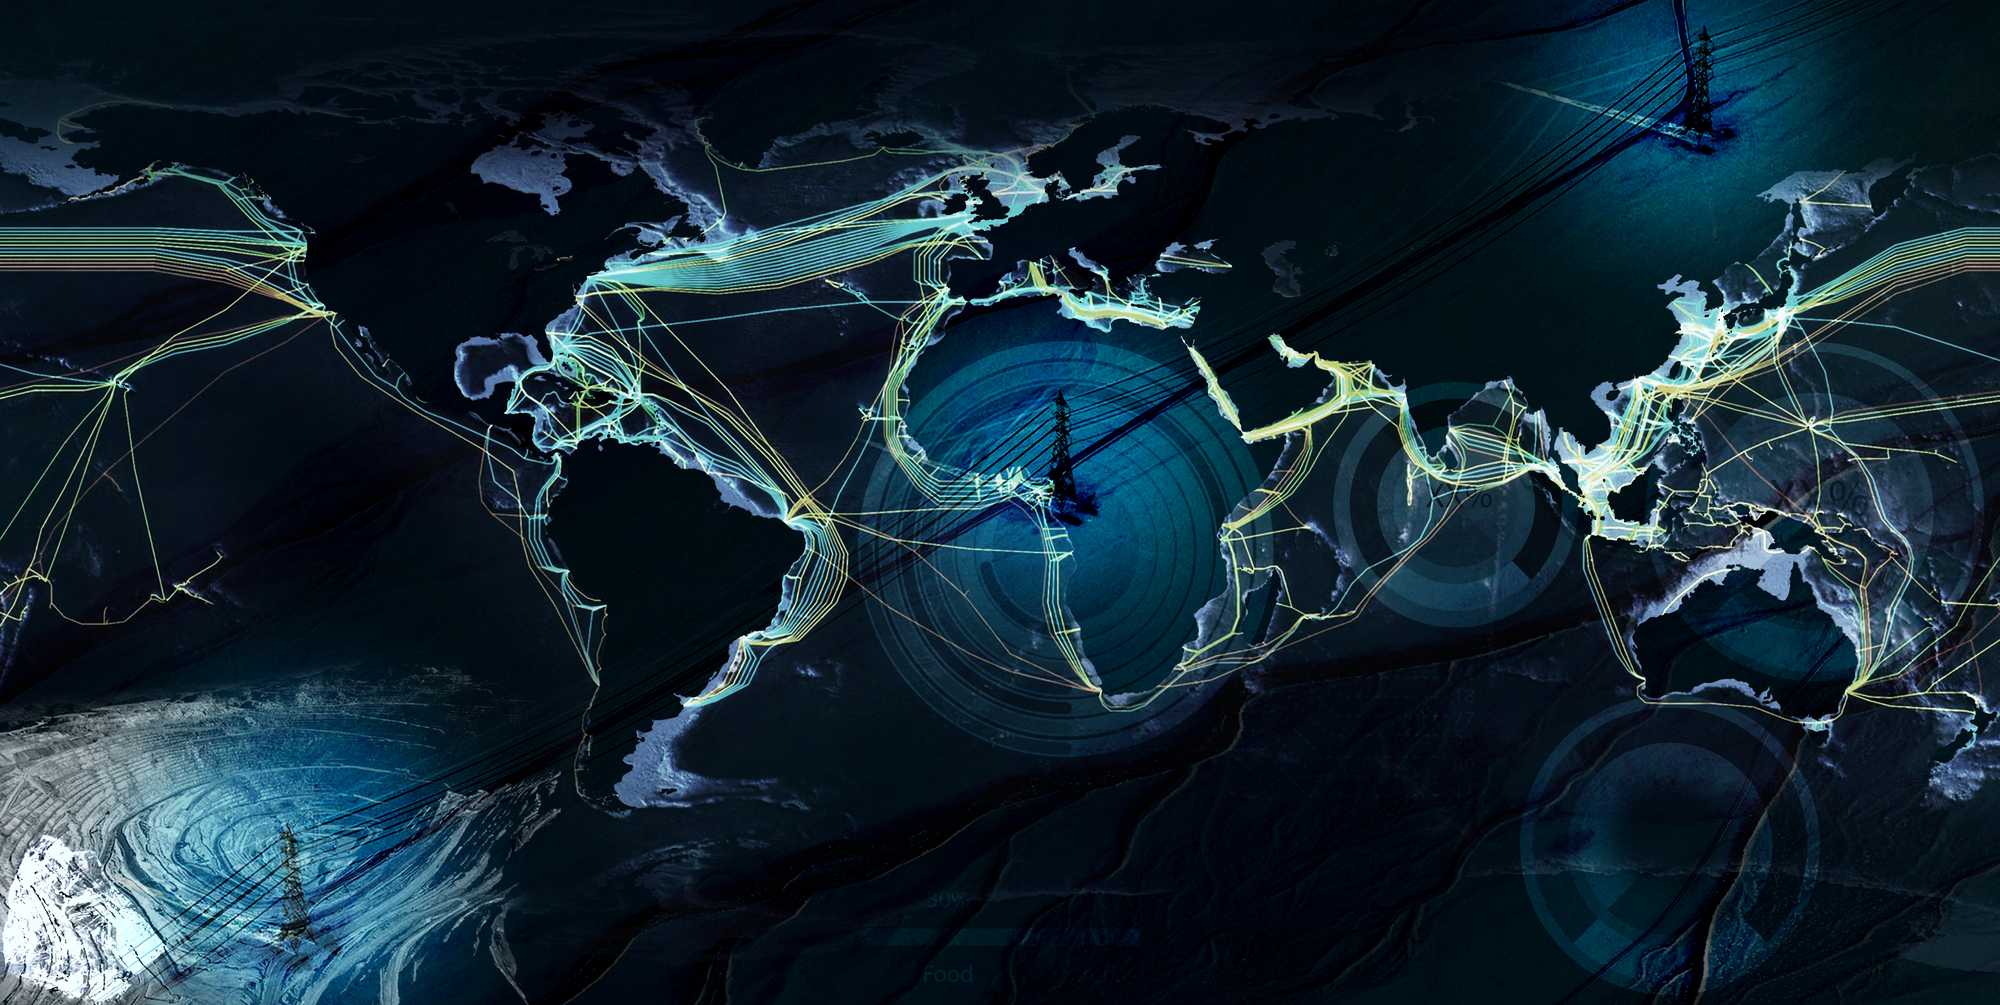 Global map showing the interconnectedness of the internet